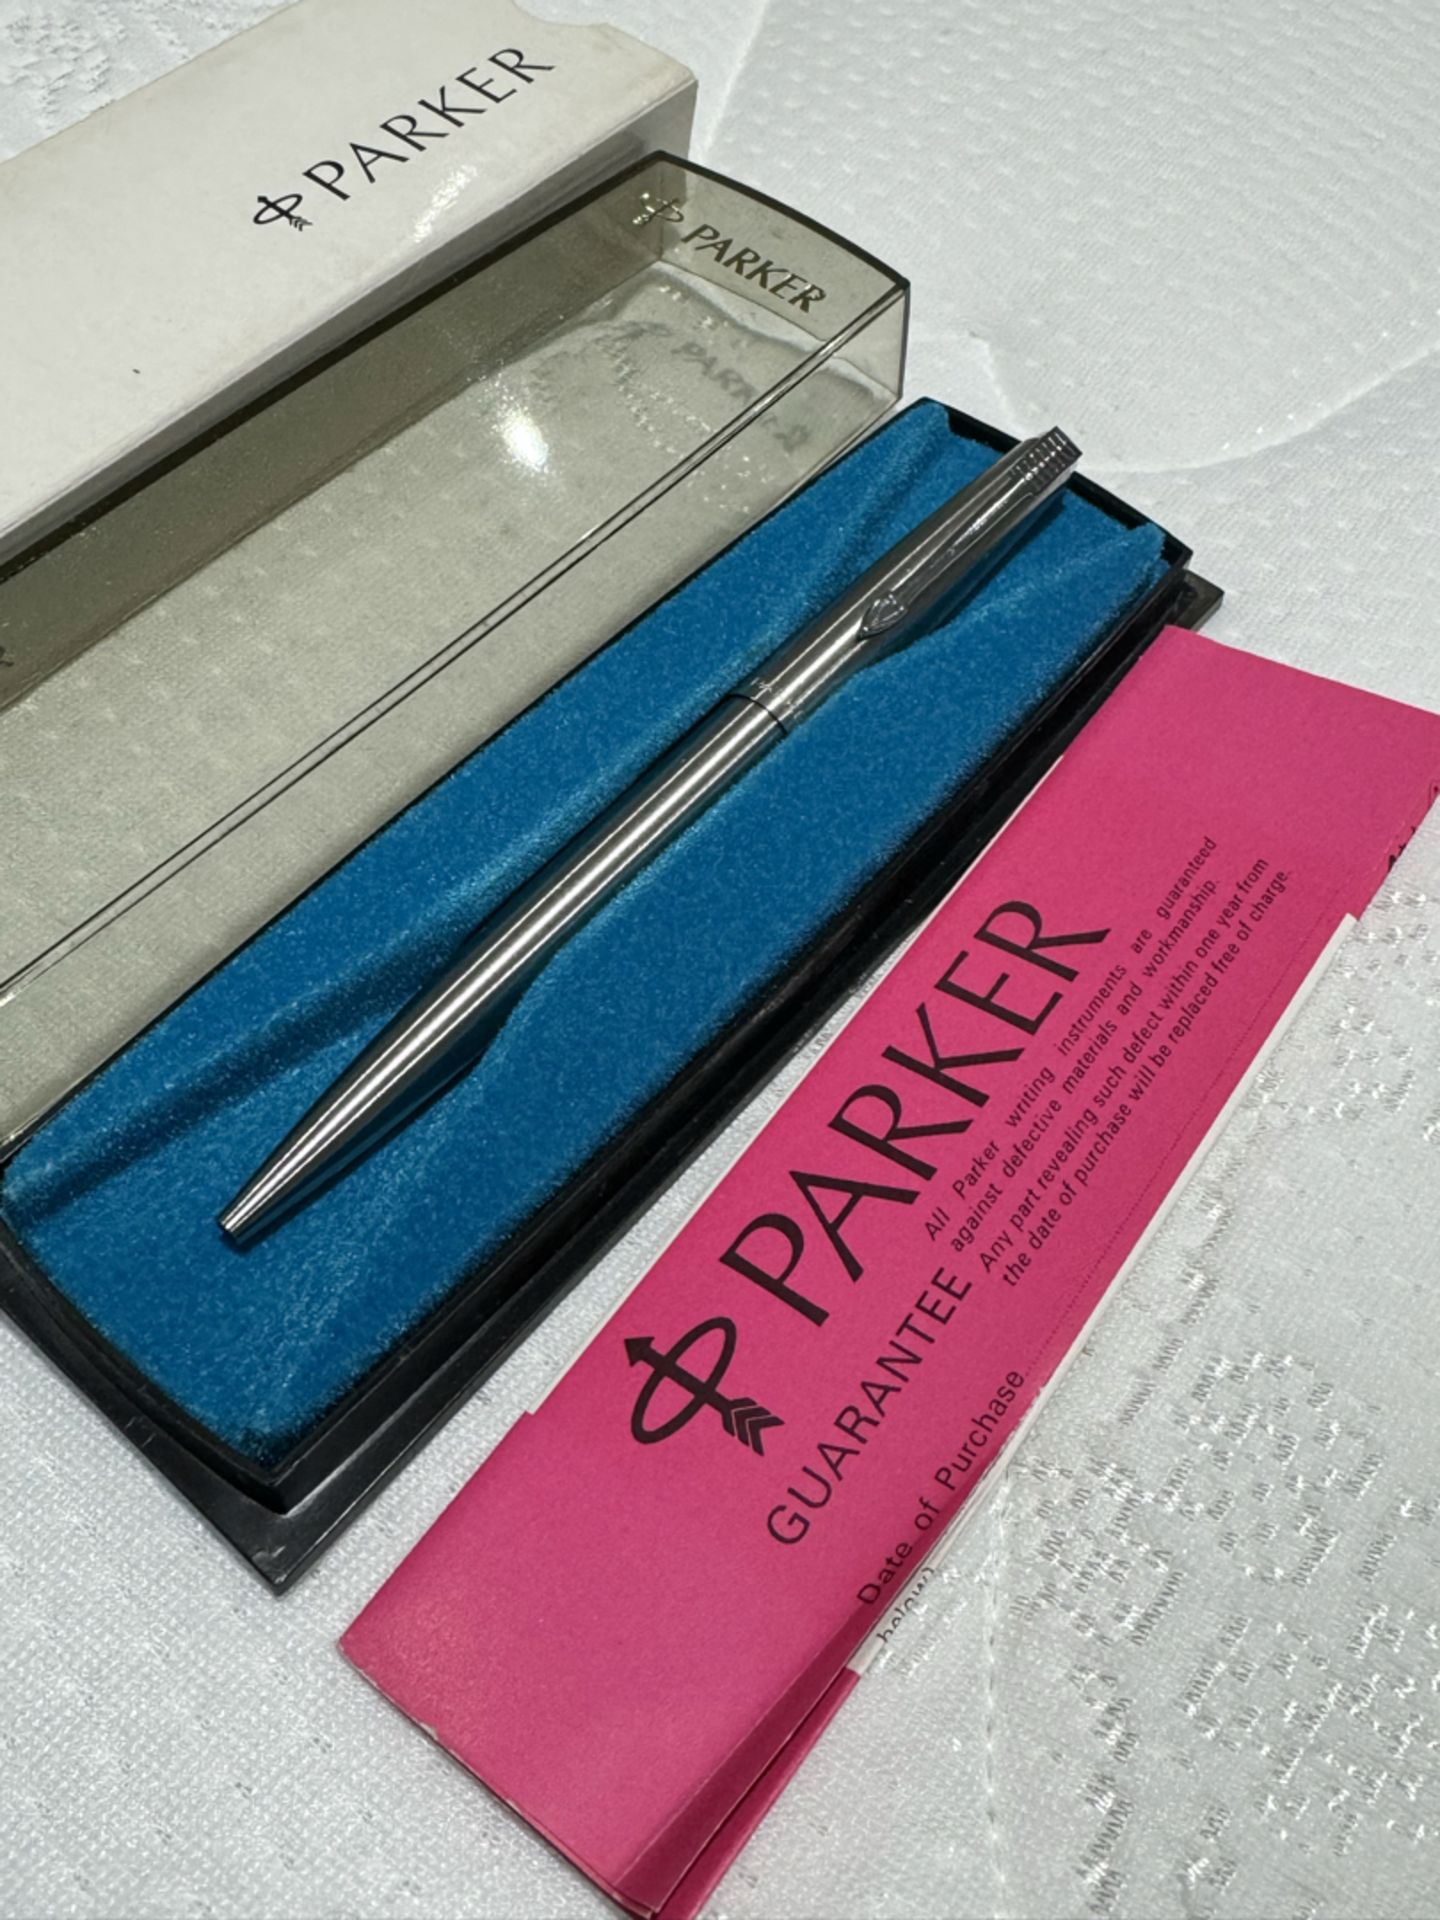 Vintage Parker Pen in Original Box - Looks new but some discolouration to packaging - NO VAT ! - Image 2 of 3